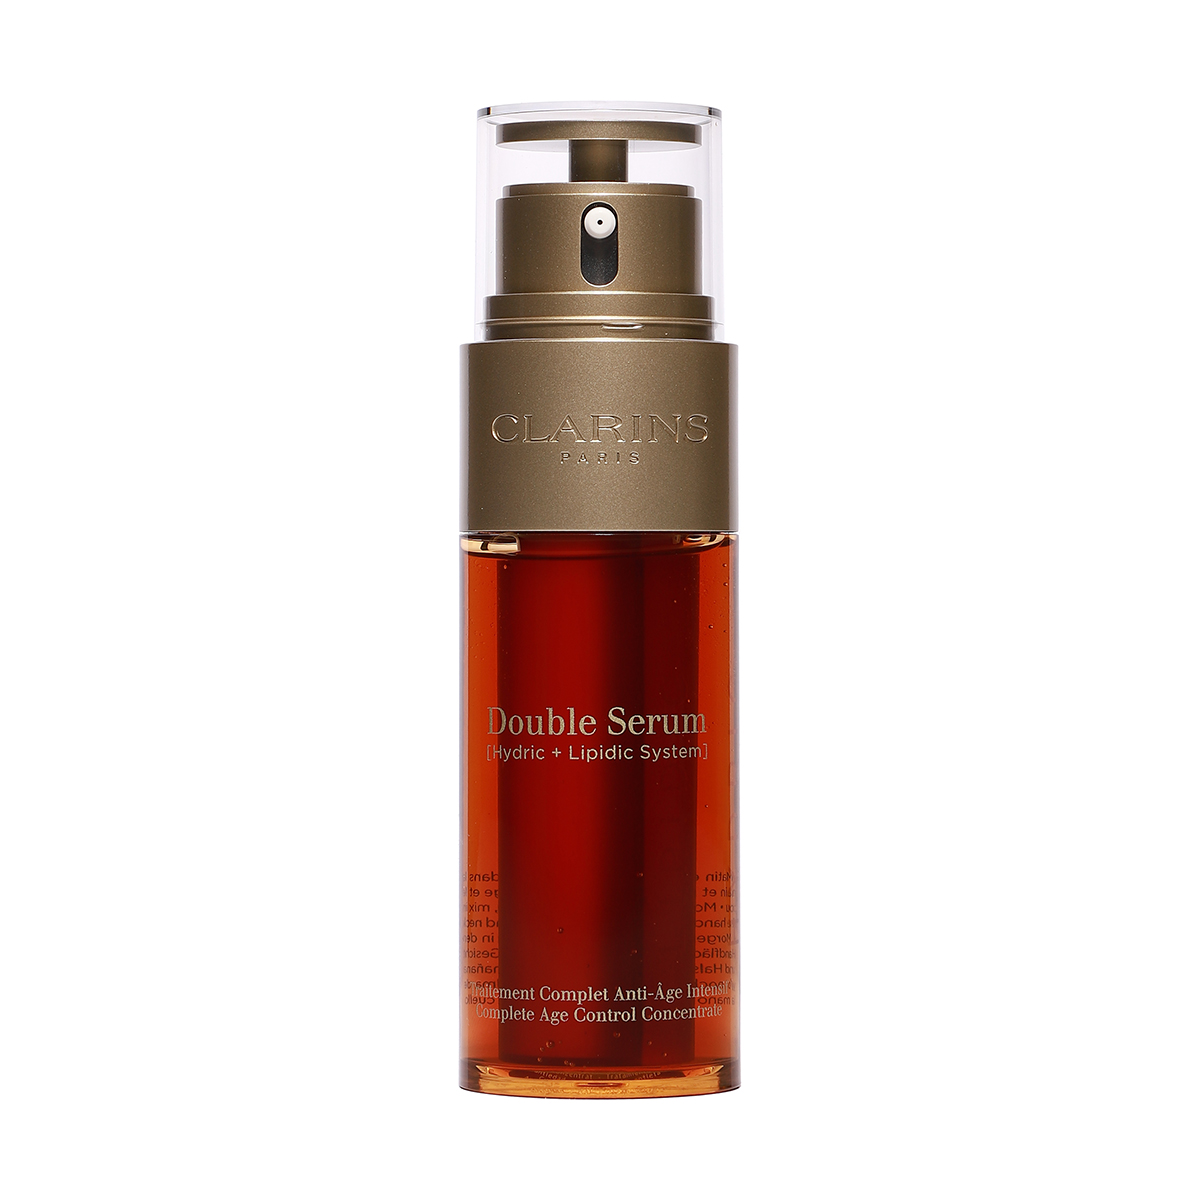 Double Serum Complete Age Control - 50ml